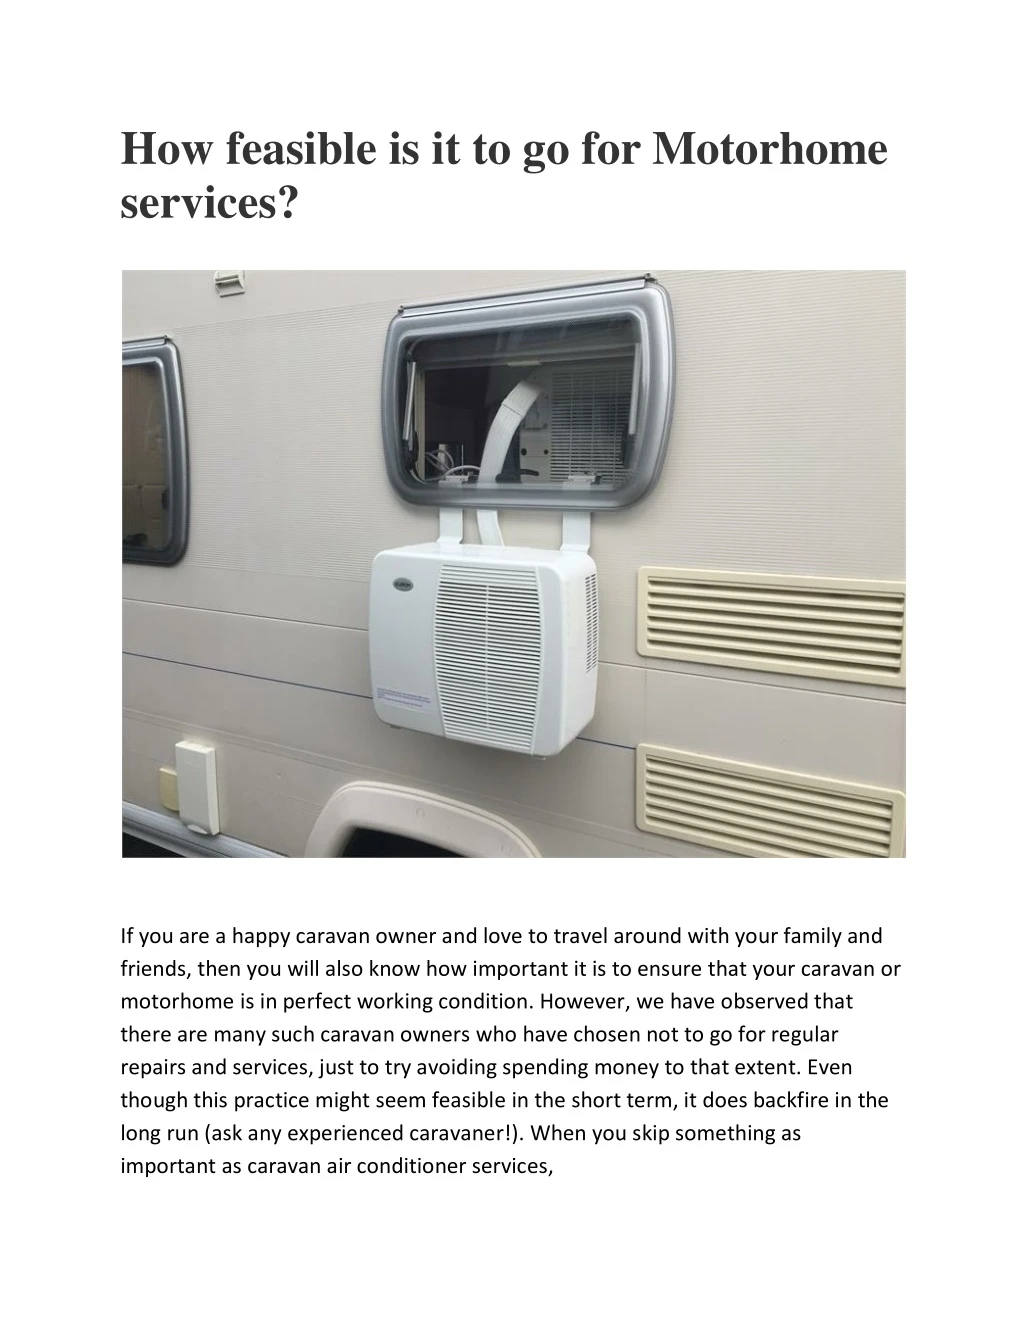 how feasible is it to go for motorhome services